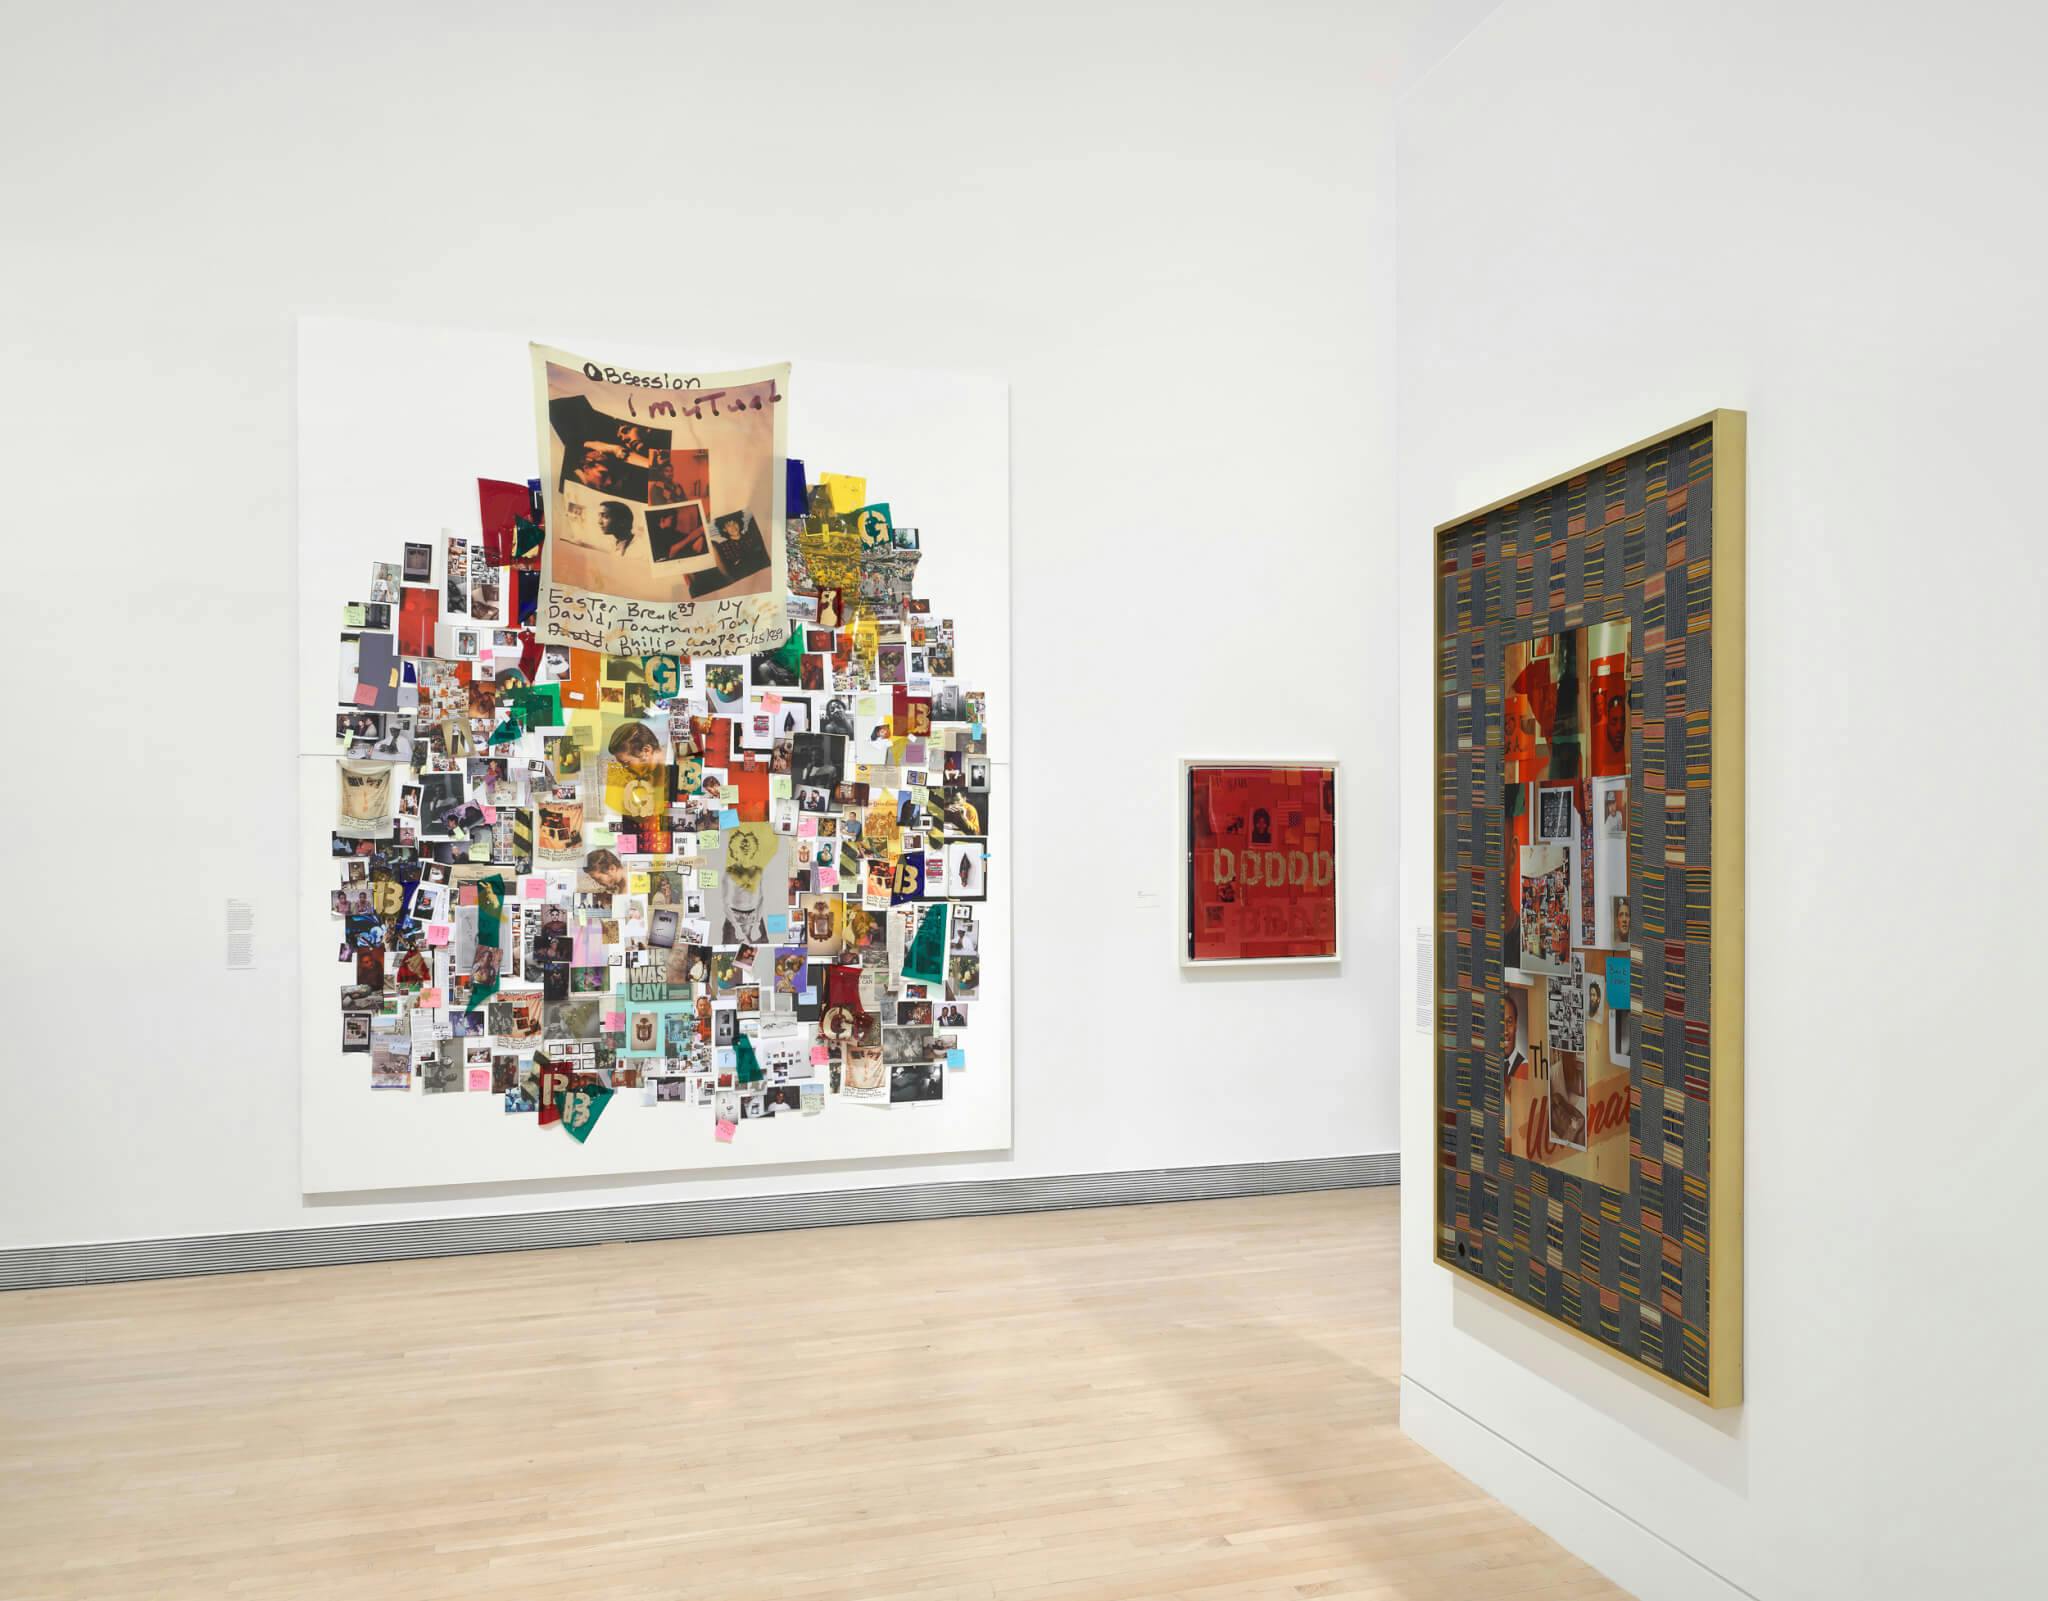 Installation view of "Lyle Ashton Harris: Our first and last love" at the Rose Art Museum